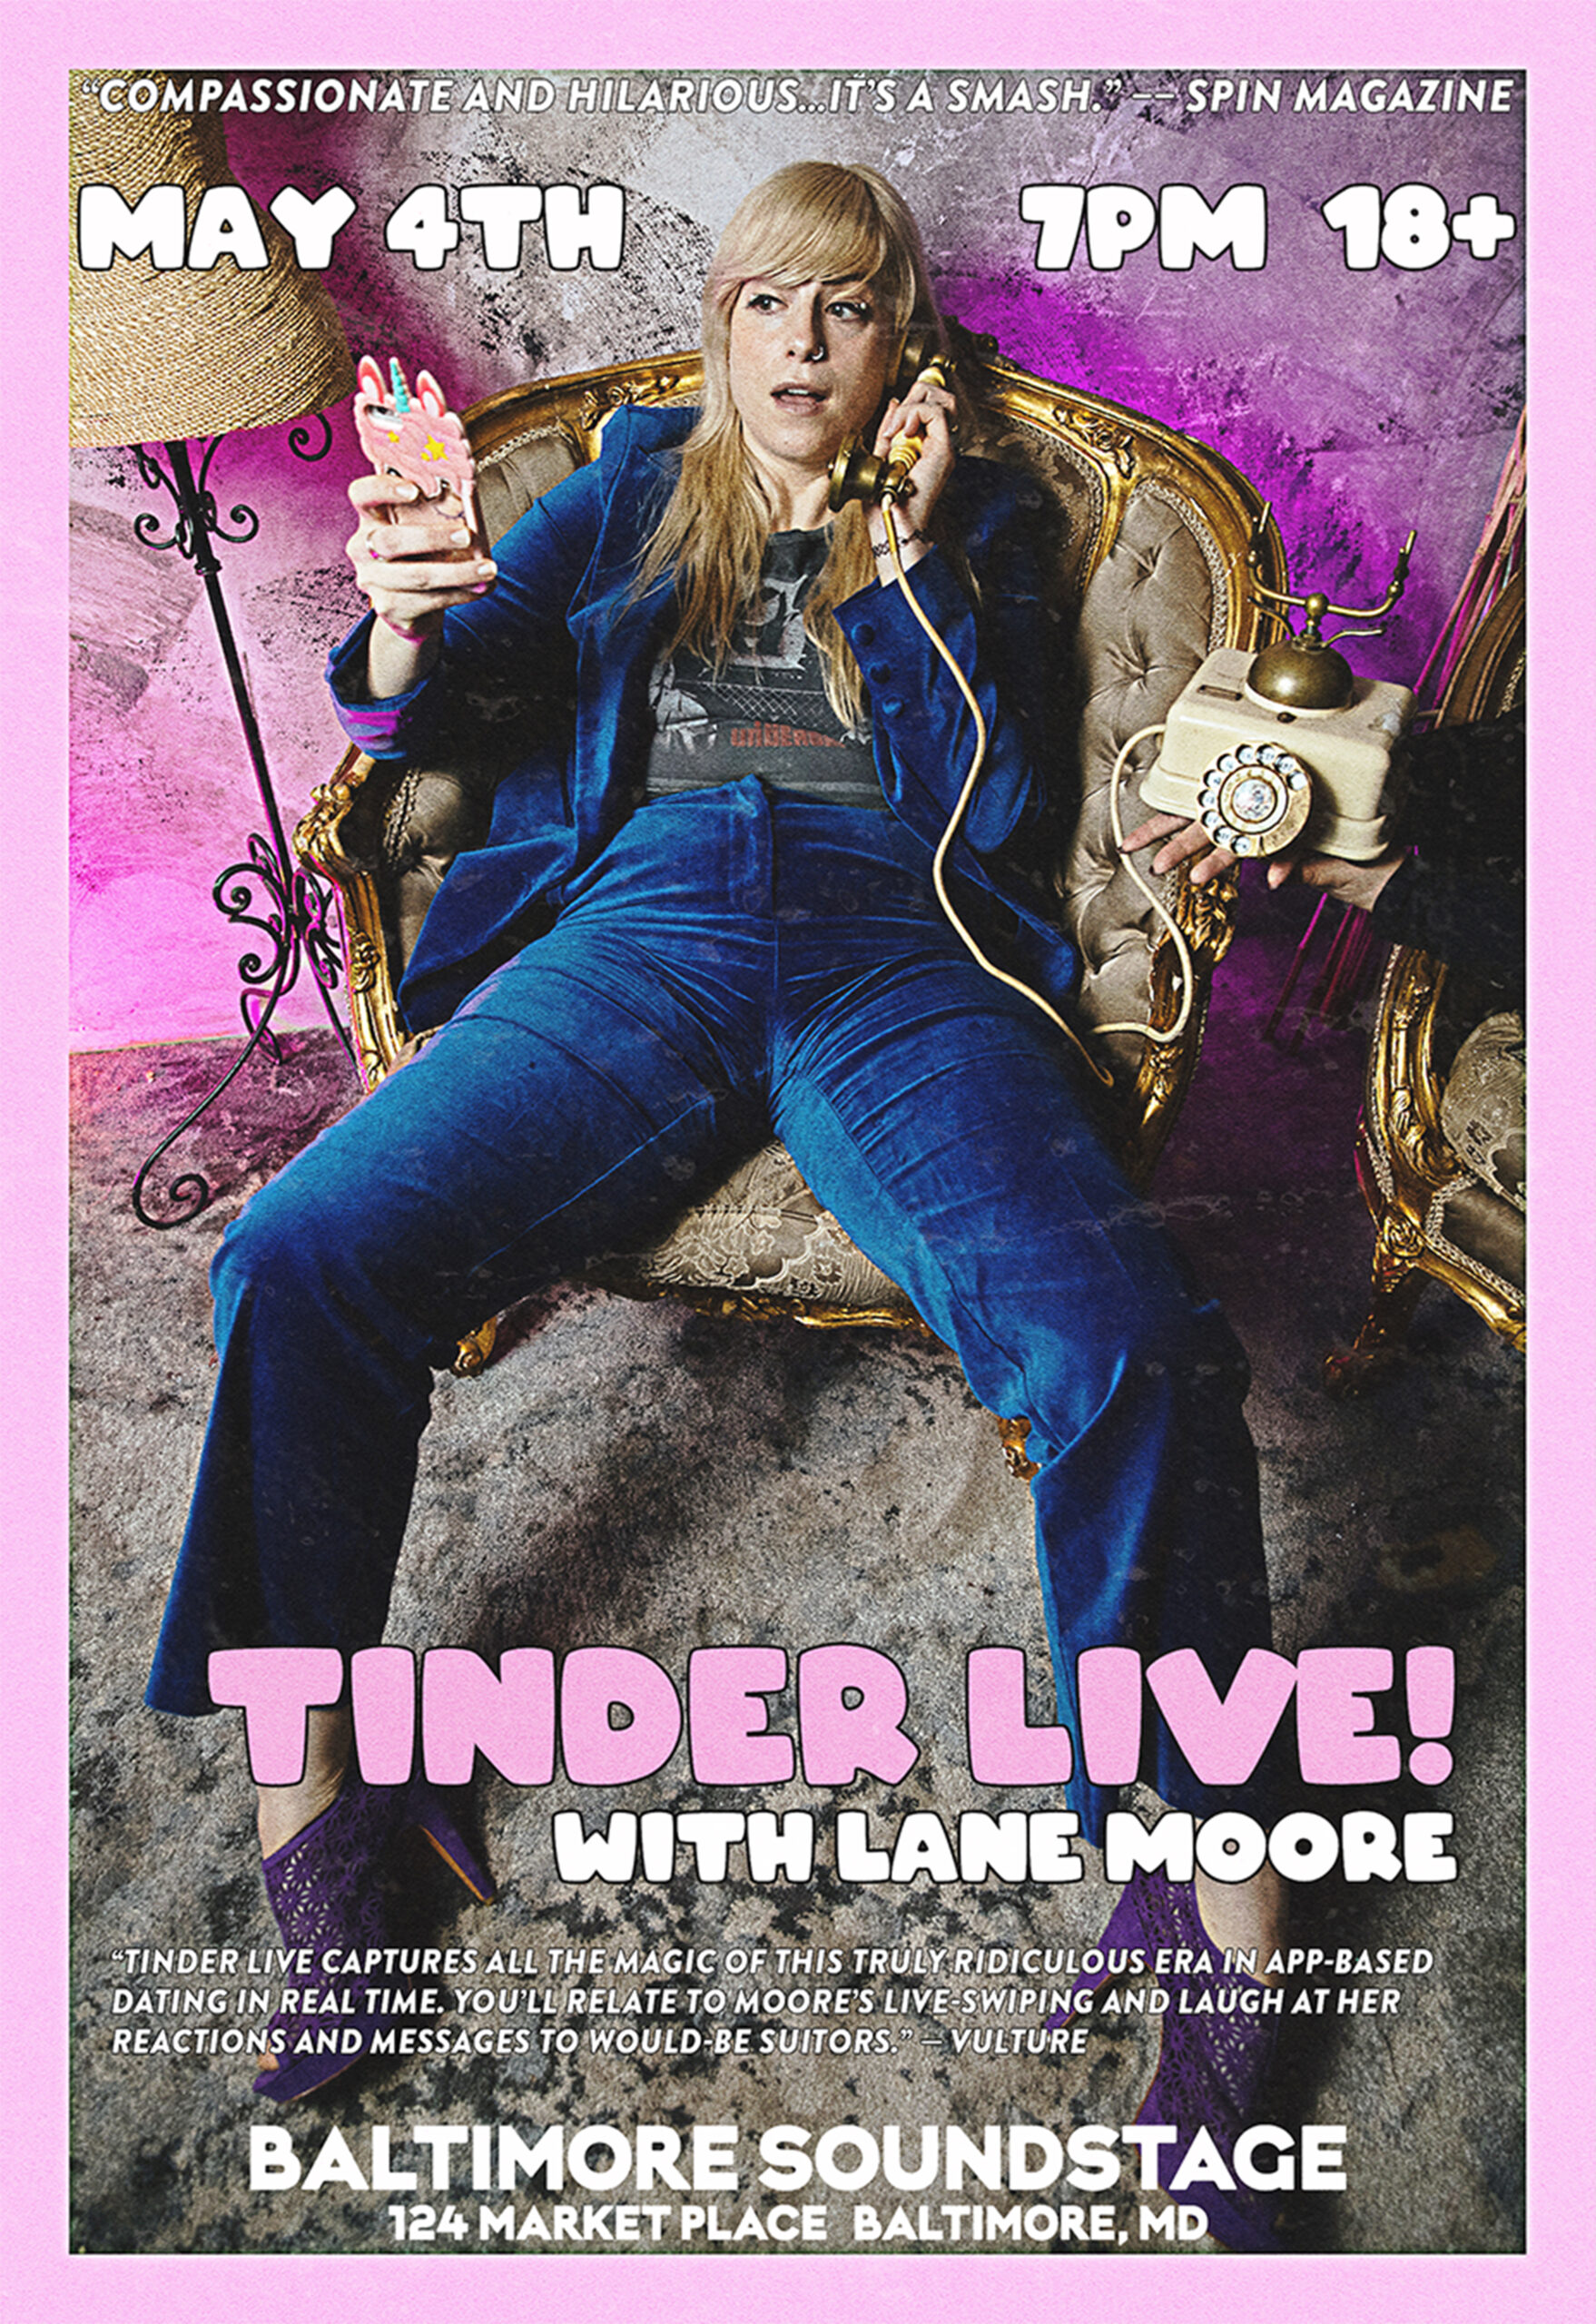 Tinder Live! with Lane Moore pic